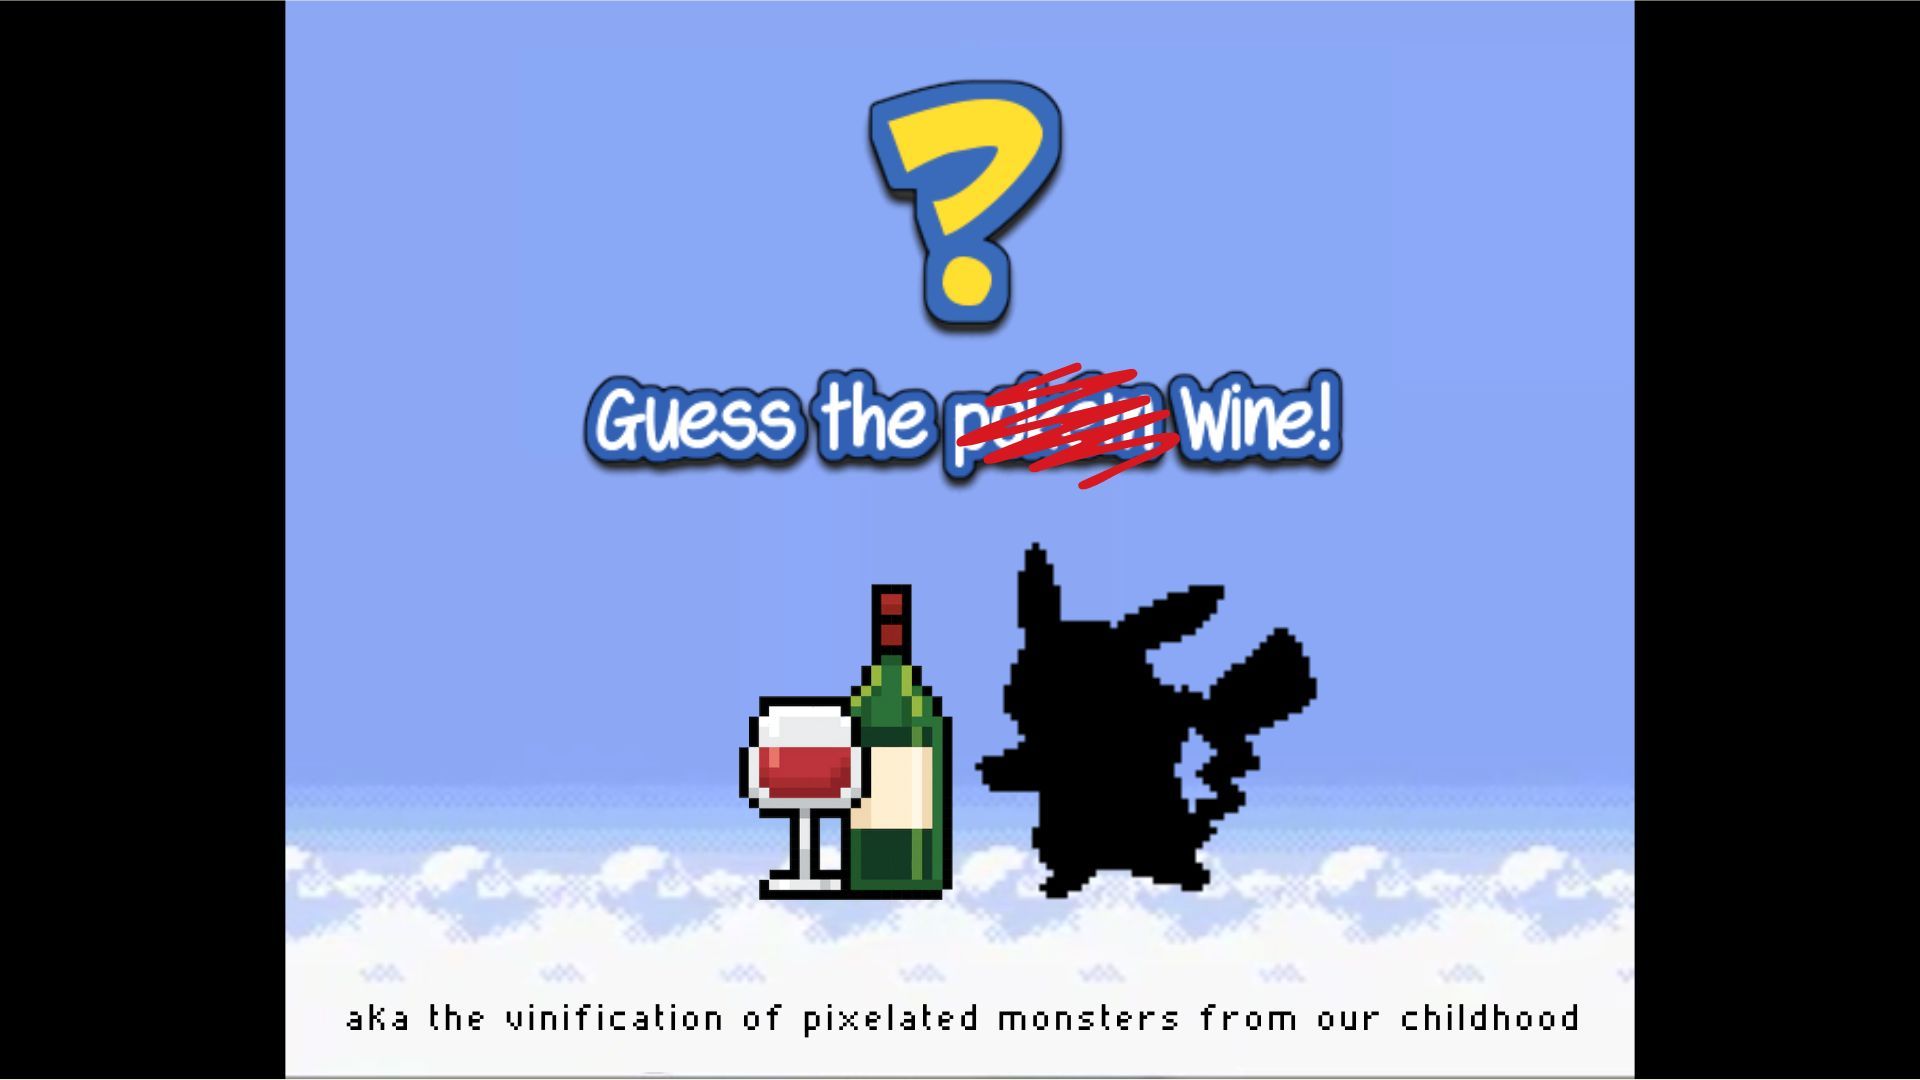 The hows and whys of 'Who's that Poke-...Wine?'